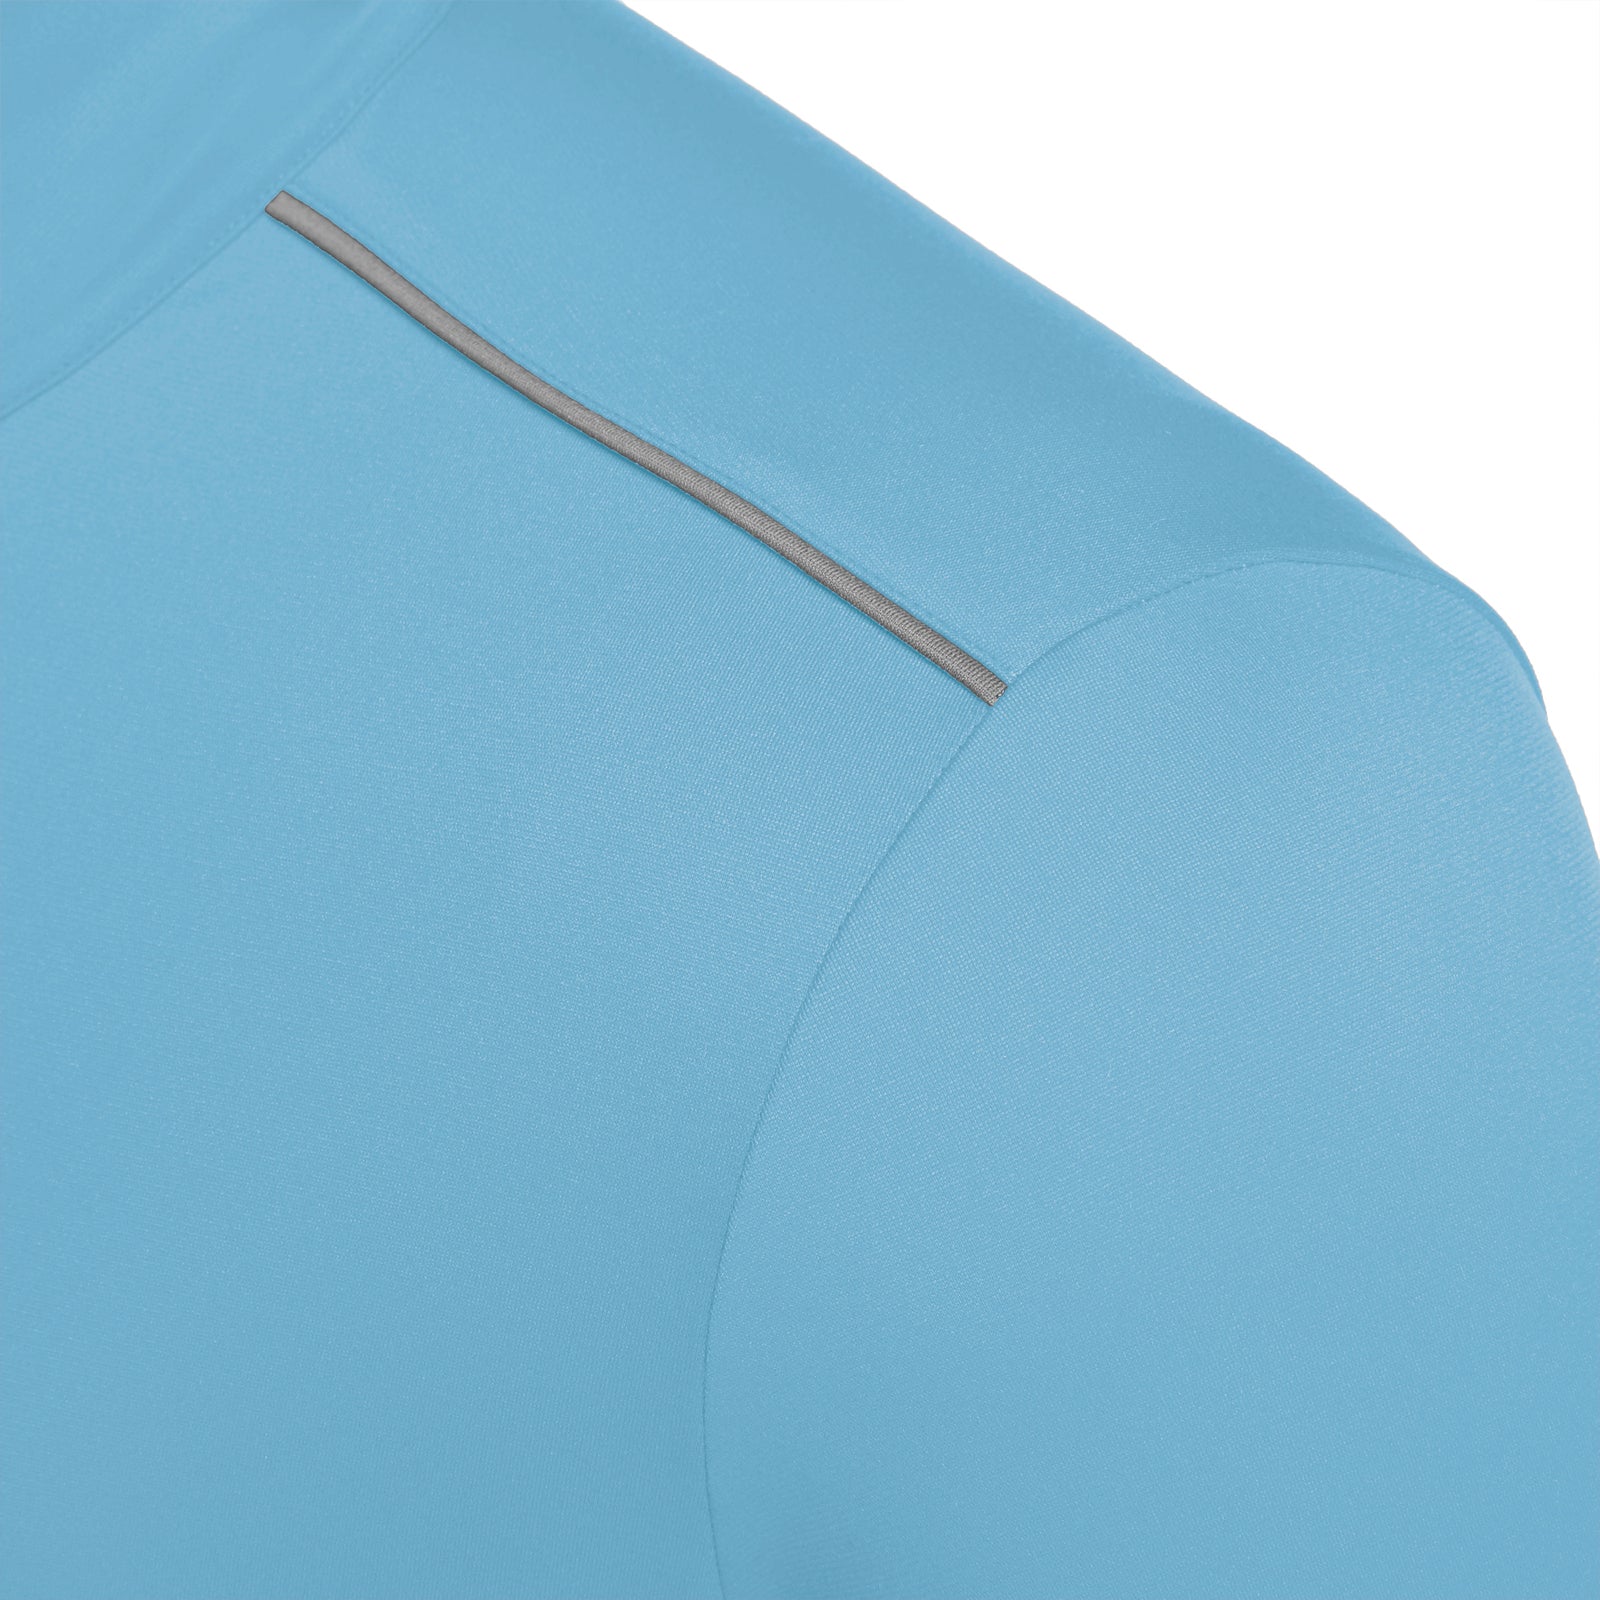 Photo of Irish Squash Men's 'Havel' 1/4 Zip Midlayer in colour Sky, close up of shoulder piping detail